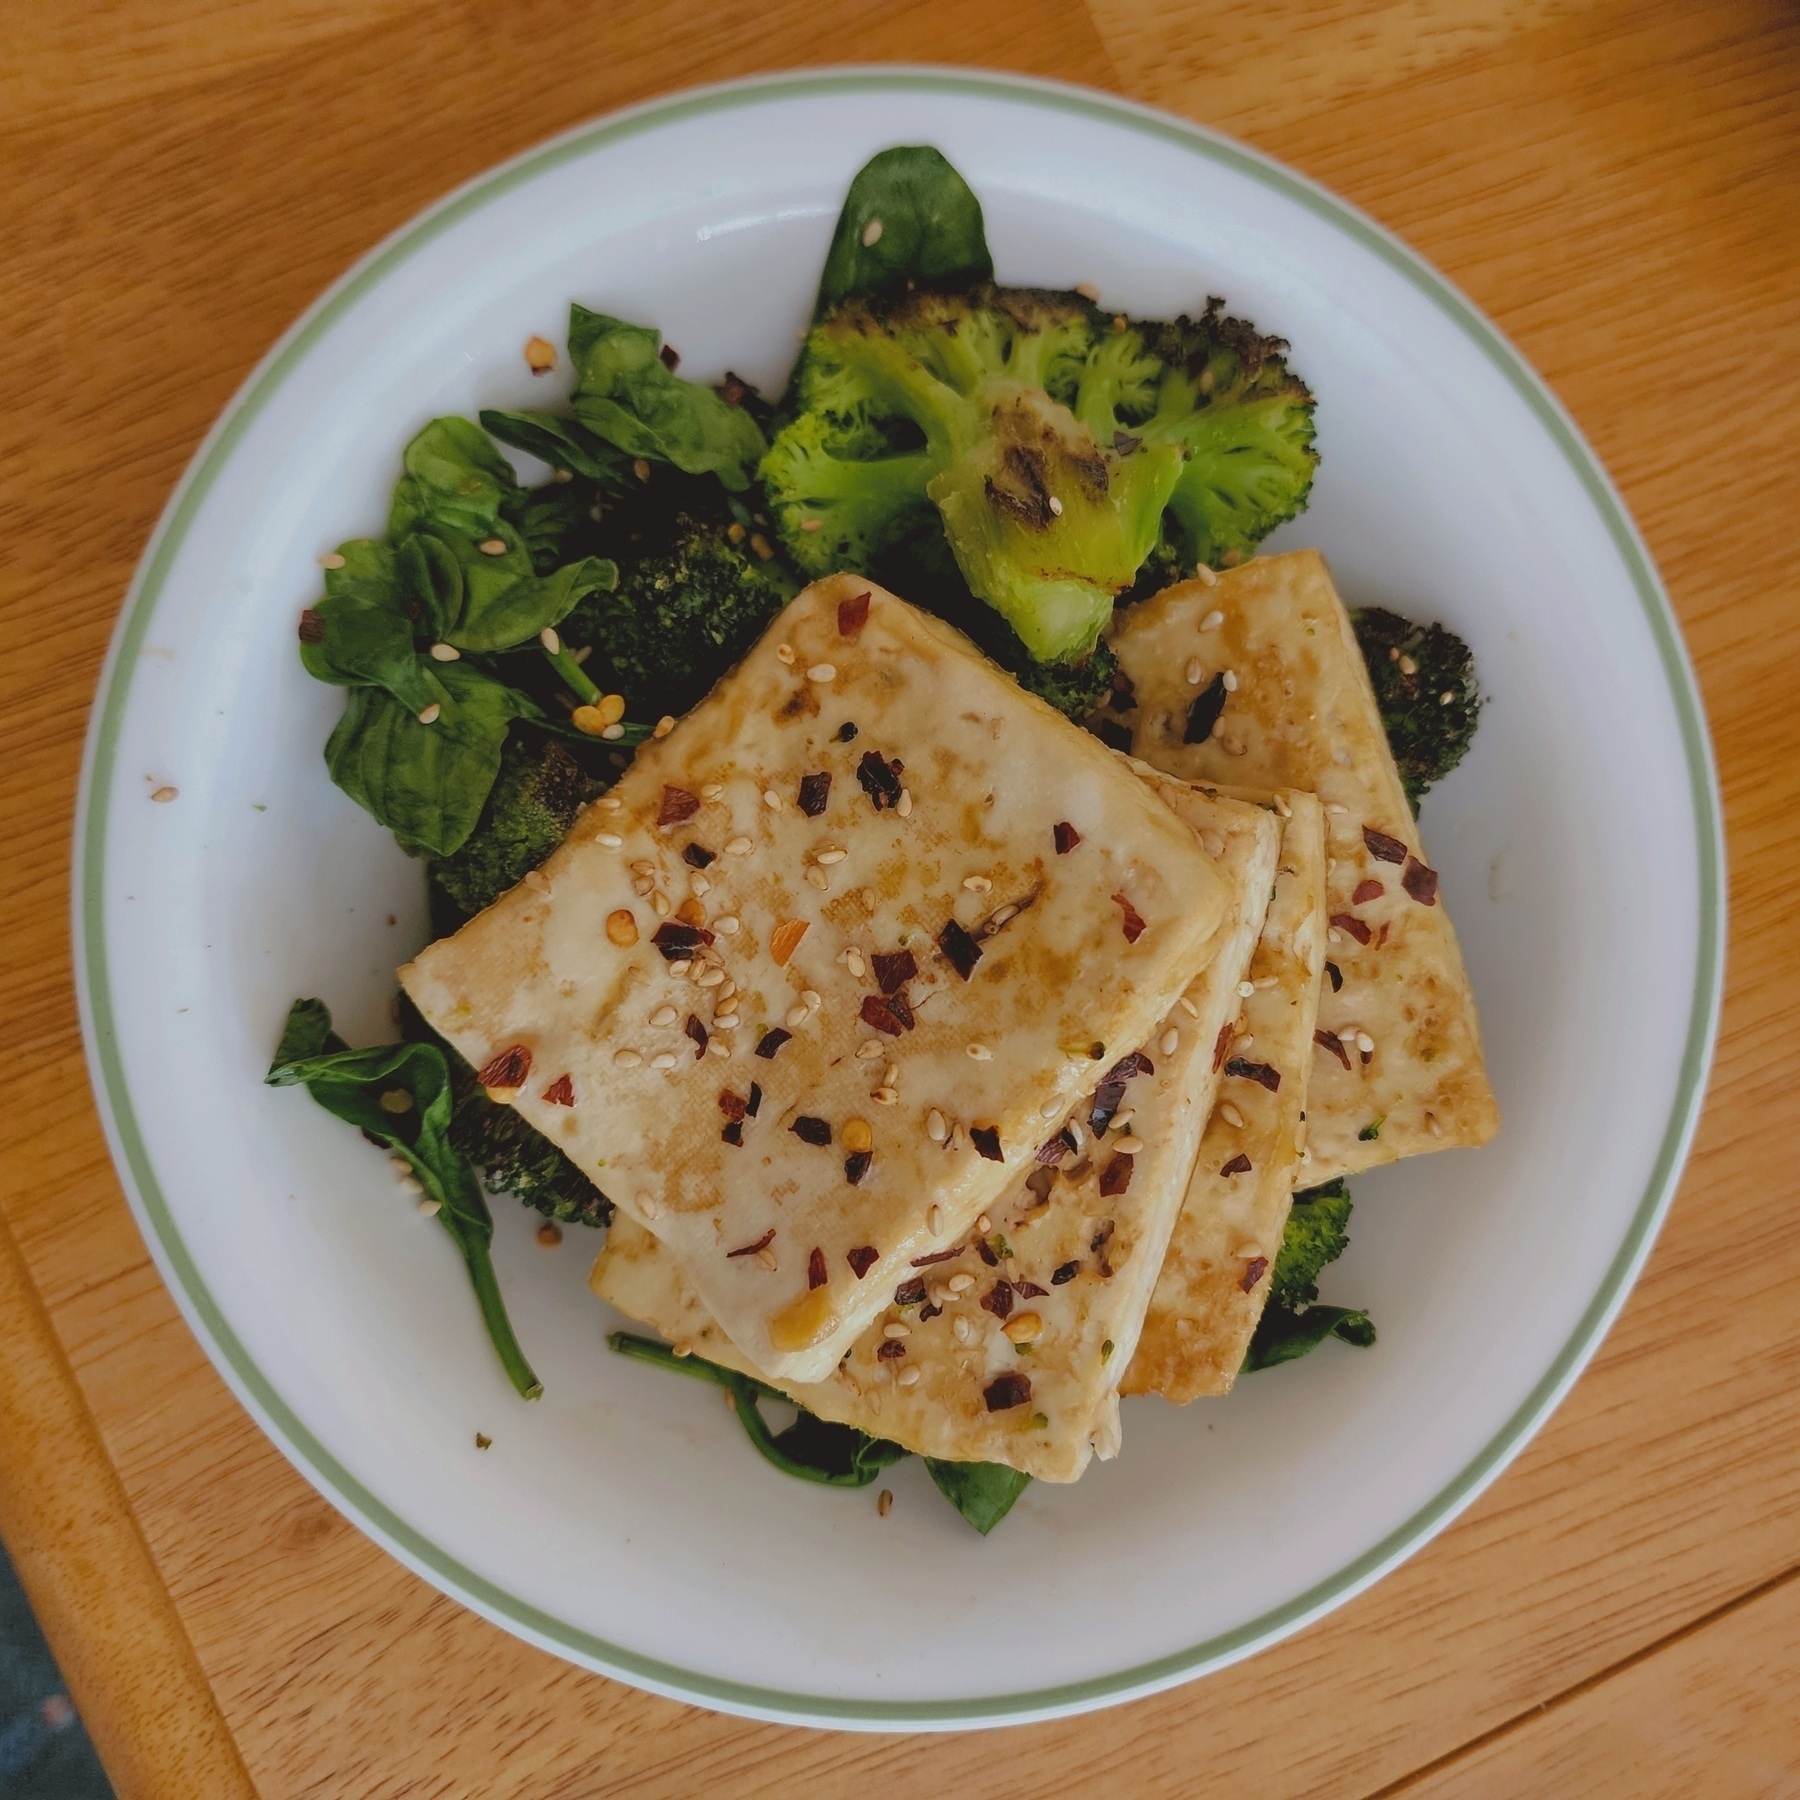 Oven baked tofu, roasted broccoli, slightly wilted spinach in soy sauce and sesame oil